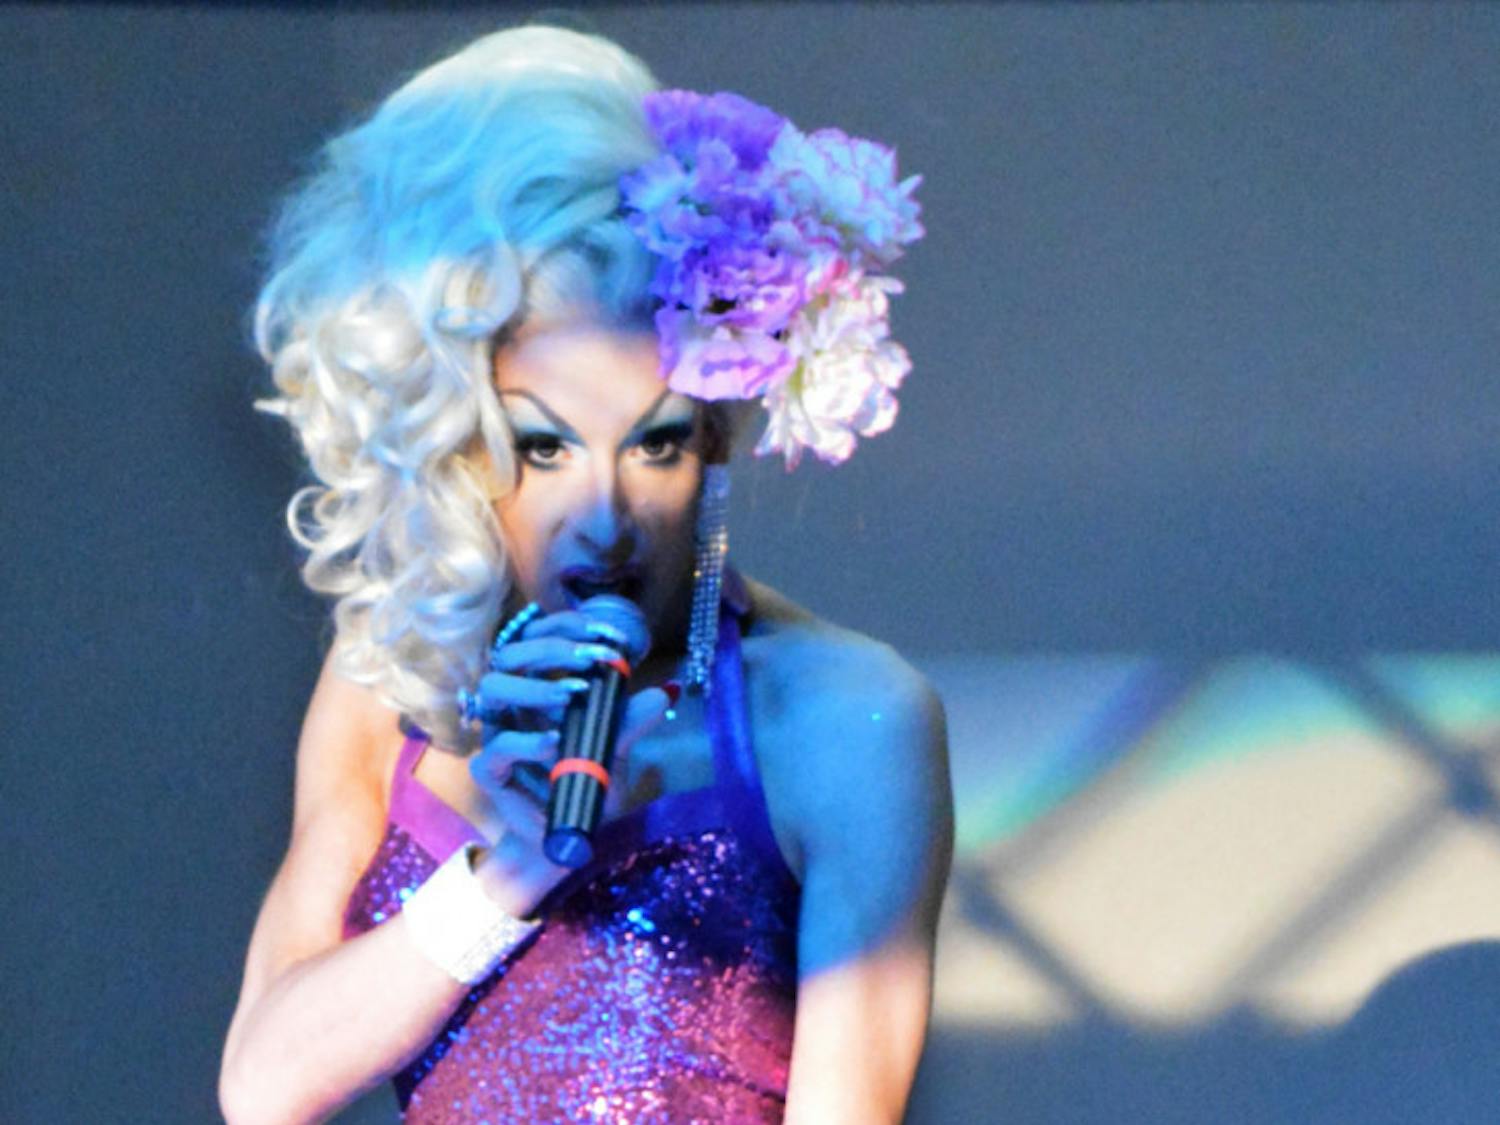 Alaska, from Pittsburgh, performs Thursday in the Reitz Union Grand Ballroom as part of Pride Awareness Month.